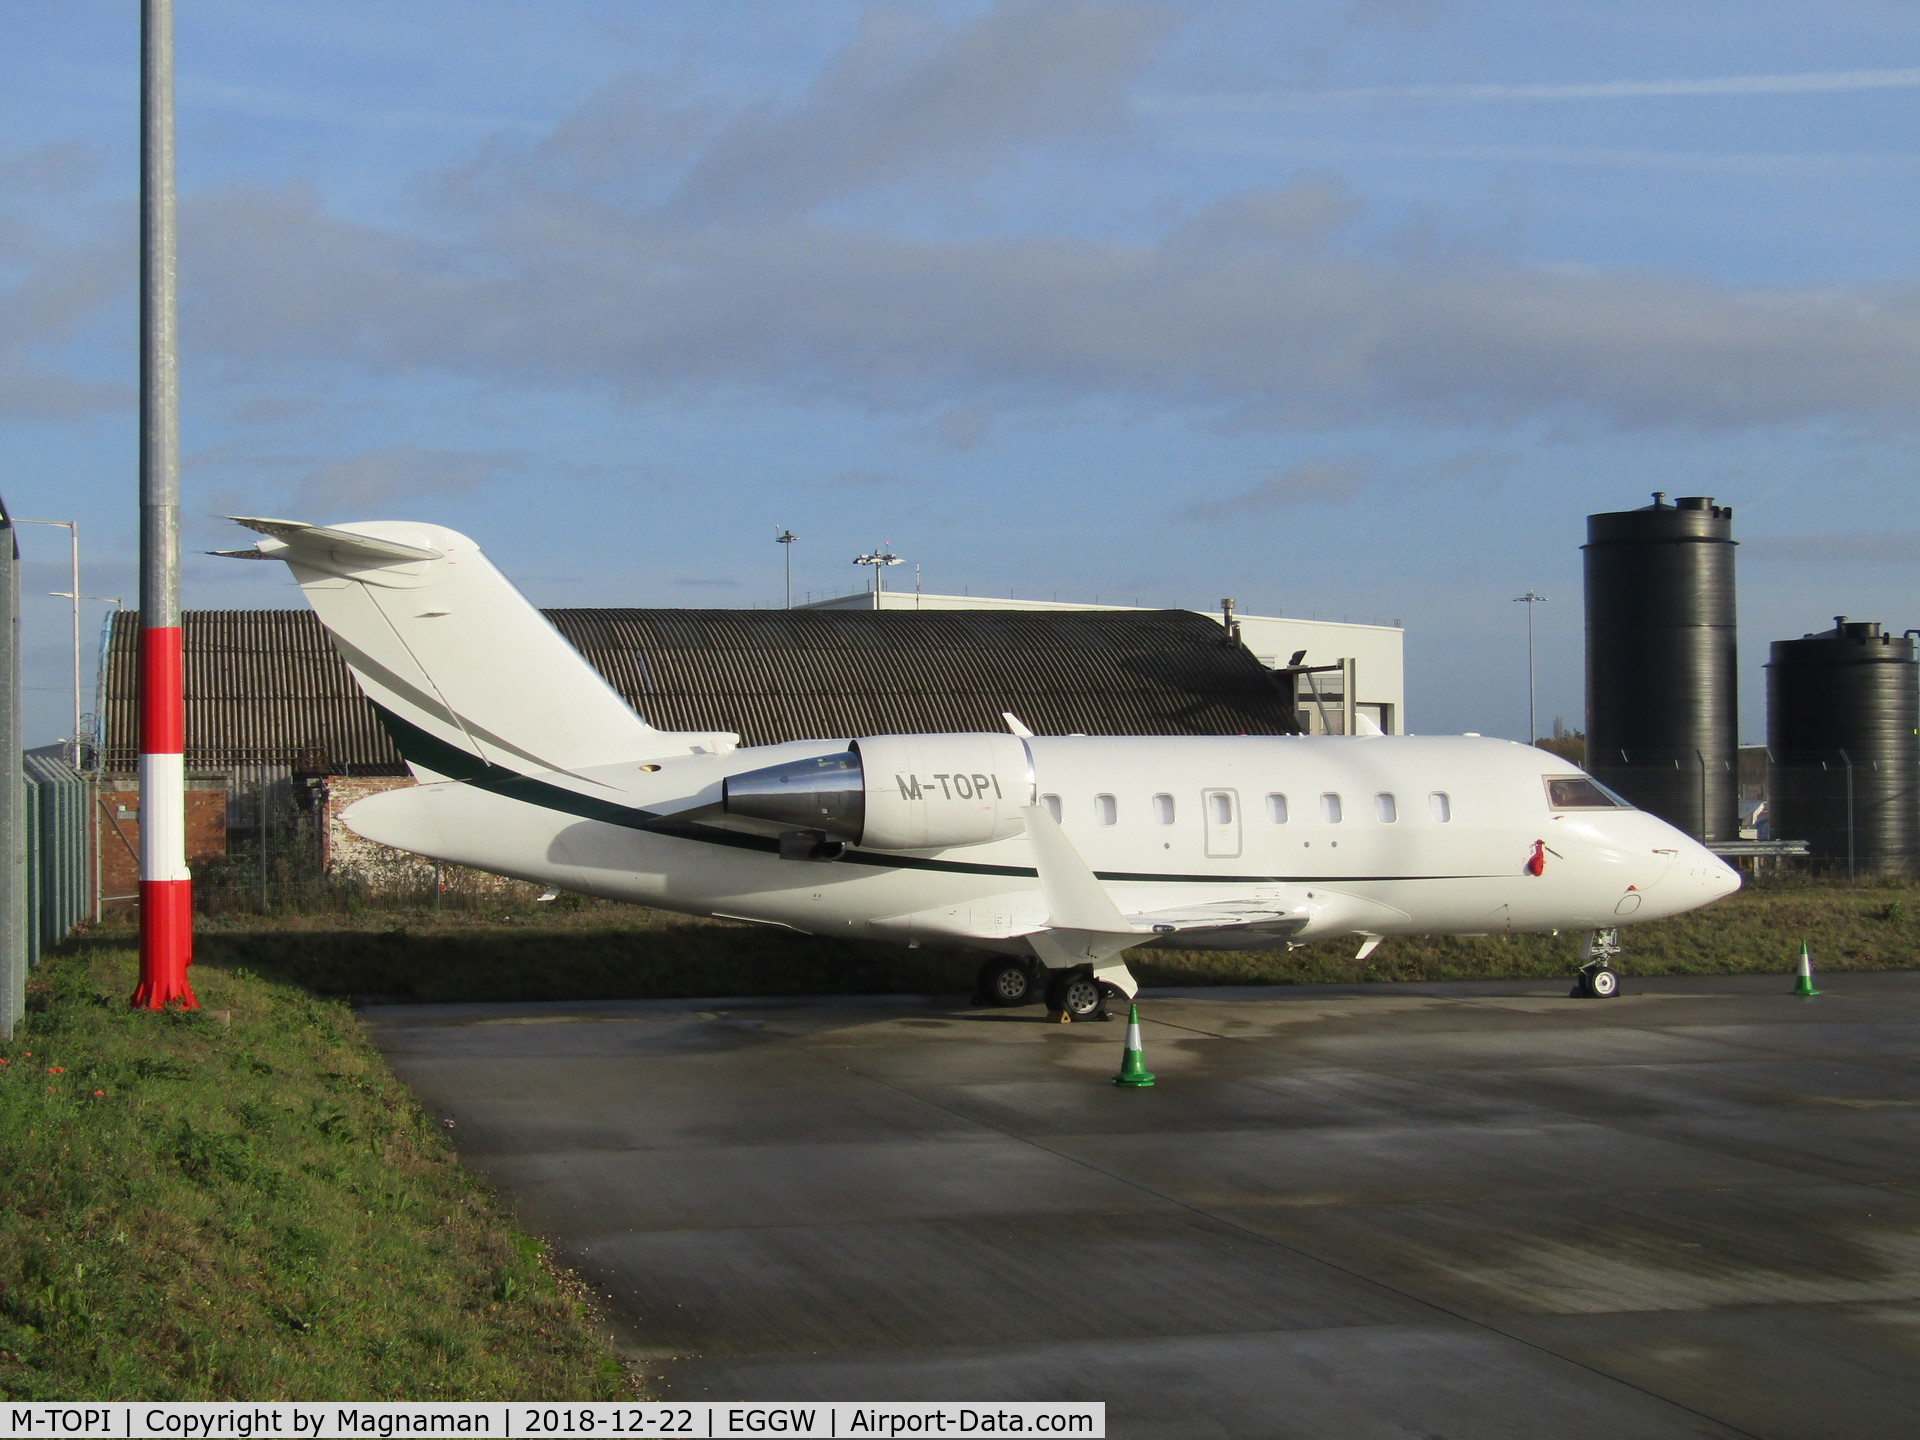 M-TOPI, 2008 Bombardier Challenger 605 (CL-600-2B16) C/N 5780, at luton airport